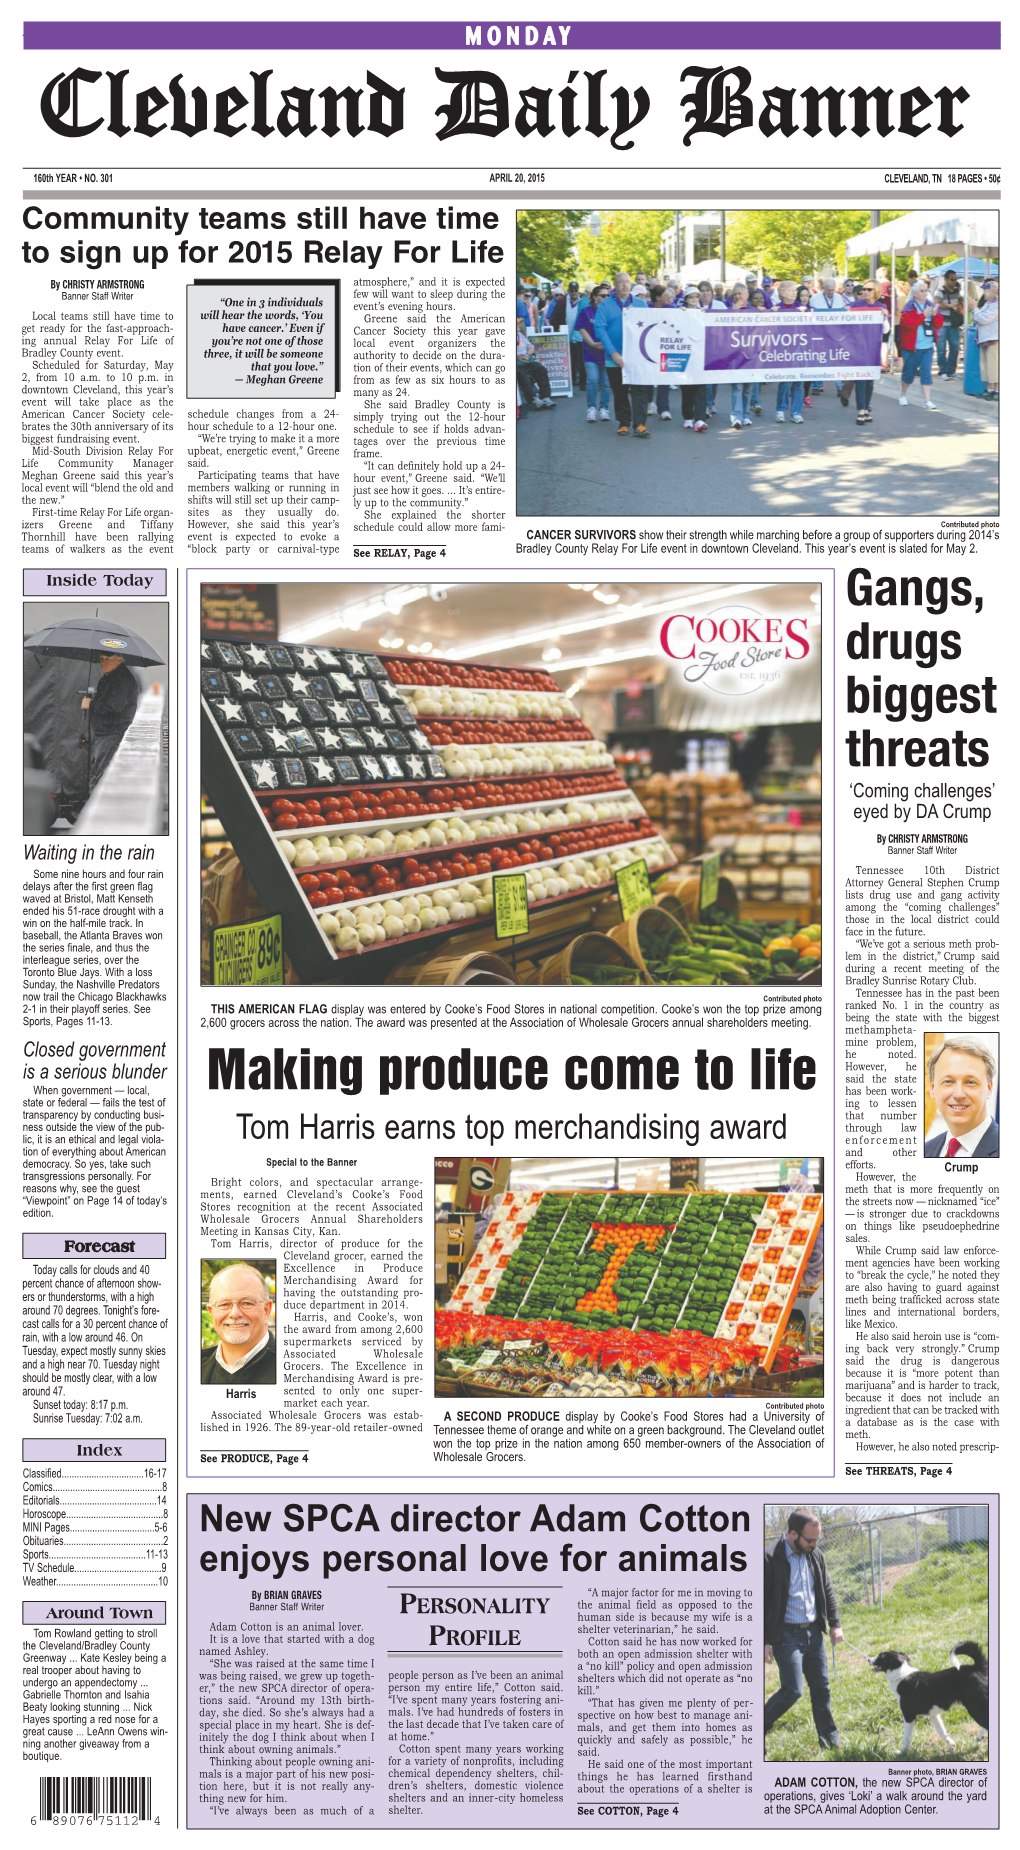 Making Produce Come to Life Gangs, Drugs Biggest Threats